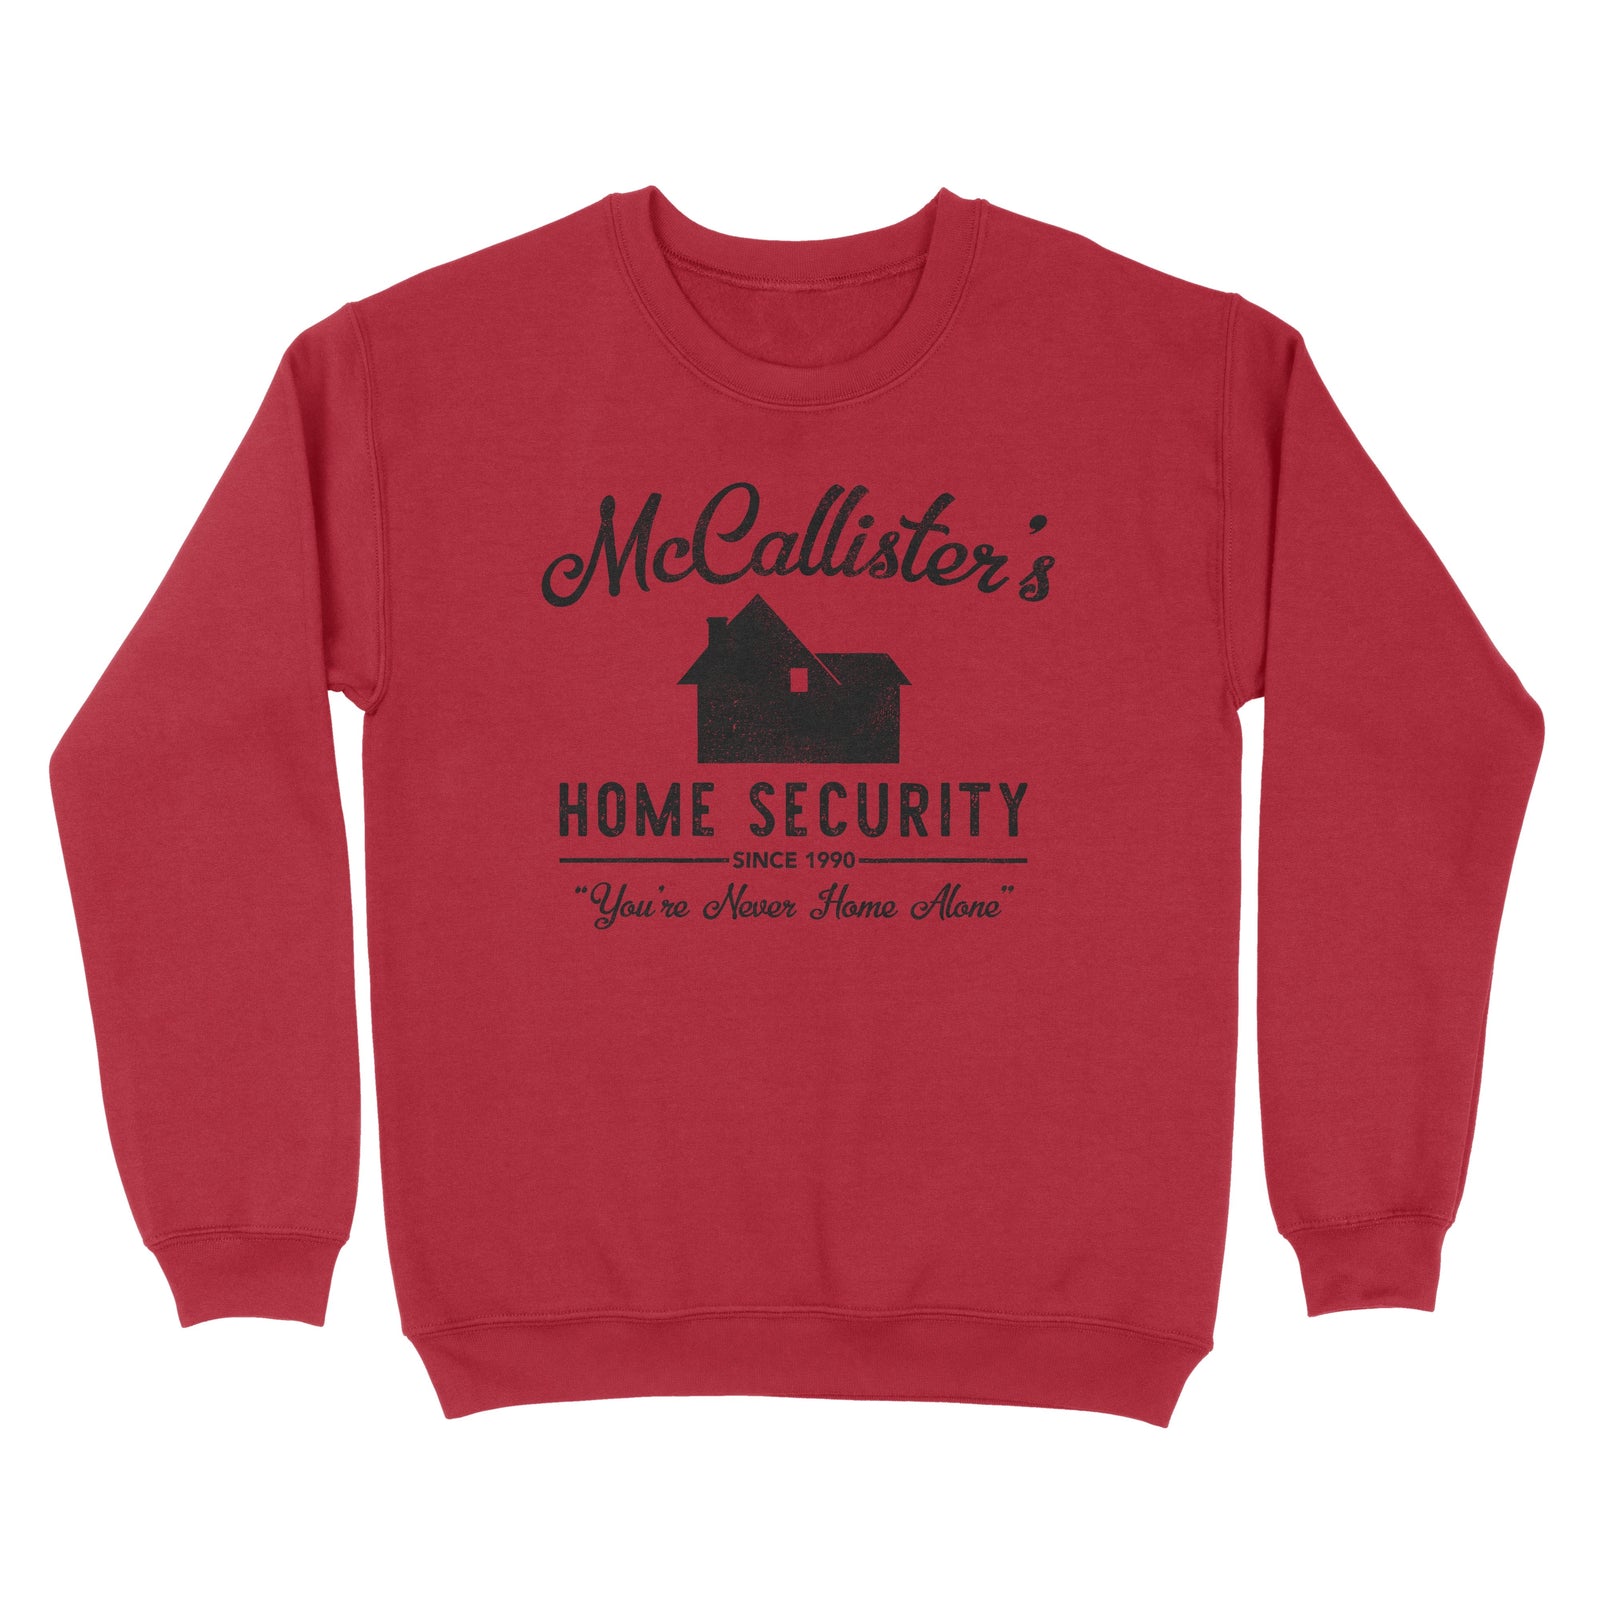 //cdn.shopify.com/s/files/1/0274/2488/2766/products/mccallisters-home-security-ugly-sweater-930111_5000x.jpg?v=1607163901 5000w,
    //cdn.shopify.com/s/files/1/0274/2488/2766/products/mccallisters-home-security-ugly-sweater-930111_4500x.jpg?v=1607163901 4500w,
    //cdn.shopify.com/s/files/1/0274/2488/2766/products/mccallisters-home-security-ugly-sweater-930111_4000x.jpg?v=1607163901 4000w,
    //cdn.shopify.com/s/files/1/0274/2488/2766/products/mccallisters-home-security-ugly-sweater-930111_3500x.jpg?v=1607163901 3500w,
    //cdn.shopify.com/s/files/1/0274/2488/2766/products/mccallisters-home-security-ugly-sweater-930111_3000x.jpg?v=1607163901 3000w,
    //cdn.shopify.com/s/files/1/0274/2488/2766/products/mccallisters-home-security-ugly-sweater-930111_2500x.jpg?v=1607163901 2500w,
    //cdn.shopify.com/s/files/1/0274/2488/2766/products/mccallisters-home-security-ugly-sweater-930111_2000x.jpg?v=1607163901 2000w,
    //cdn.shopify.com/s/files/1/0274/2488/2766/products/mccallisters-home-security-ugly-sweater-930111_1800x.jpg?v=1607163901 1800w,
    //cdn.shopify.com/s/files/1/0274/2488/2766/products/mccallisters-home-security-ugly-sweater-930111_1600x.jpg?v=1607163901 1600w,
    //cdn.shopify.com/s/files/1/0274/2488/2766/products/mccallisters-home-security-ugly-sweater-930111_1400x.jpg?v=1607163901 1400w,
    //cdn.shopify.com/s/files/1/0274/2488/2766/products/mccallisters-home-security-ugly-sweater-930111_1200x.jpg?v=1607163901 1200w,
    //cdn.shopify.com/s/files/1/0274/2488/2766/products/mccallisters-home-security-ugly-sweater-930111_1000x.jpg?v=1607163901 1000w,
    //cdn.shopify.com/s/files/1/0274/2488/2766/products/mccallisters-home-security-ugly-sweater-930111_800x.jpg?v=1607163901 800w,
    //cdn.shopify.com/s/files/1/0274/2488/2766/products/mccallisters-home-security-ugly-sweater-930111_600x.jpg?v=1607163901 600w,
    //cdn.shopify.com/s/files/1/0274/2488/2766/products/mccallisters-home-security-ugly-sweater-930111_400x.jpg?v=1607163901 400w,
    //cdn.shopify.com/s/files/1/0274/2488/2766/products/mccallisters-home-security-ugly-sweater-930111_200x.jpg?v=1607163901 200w